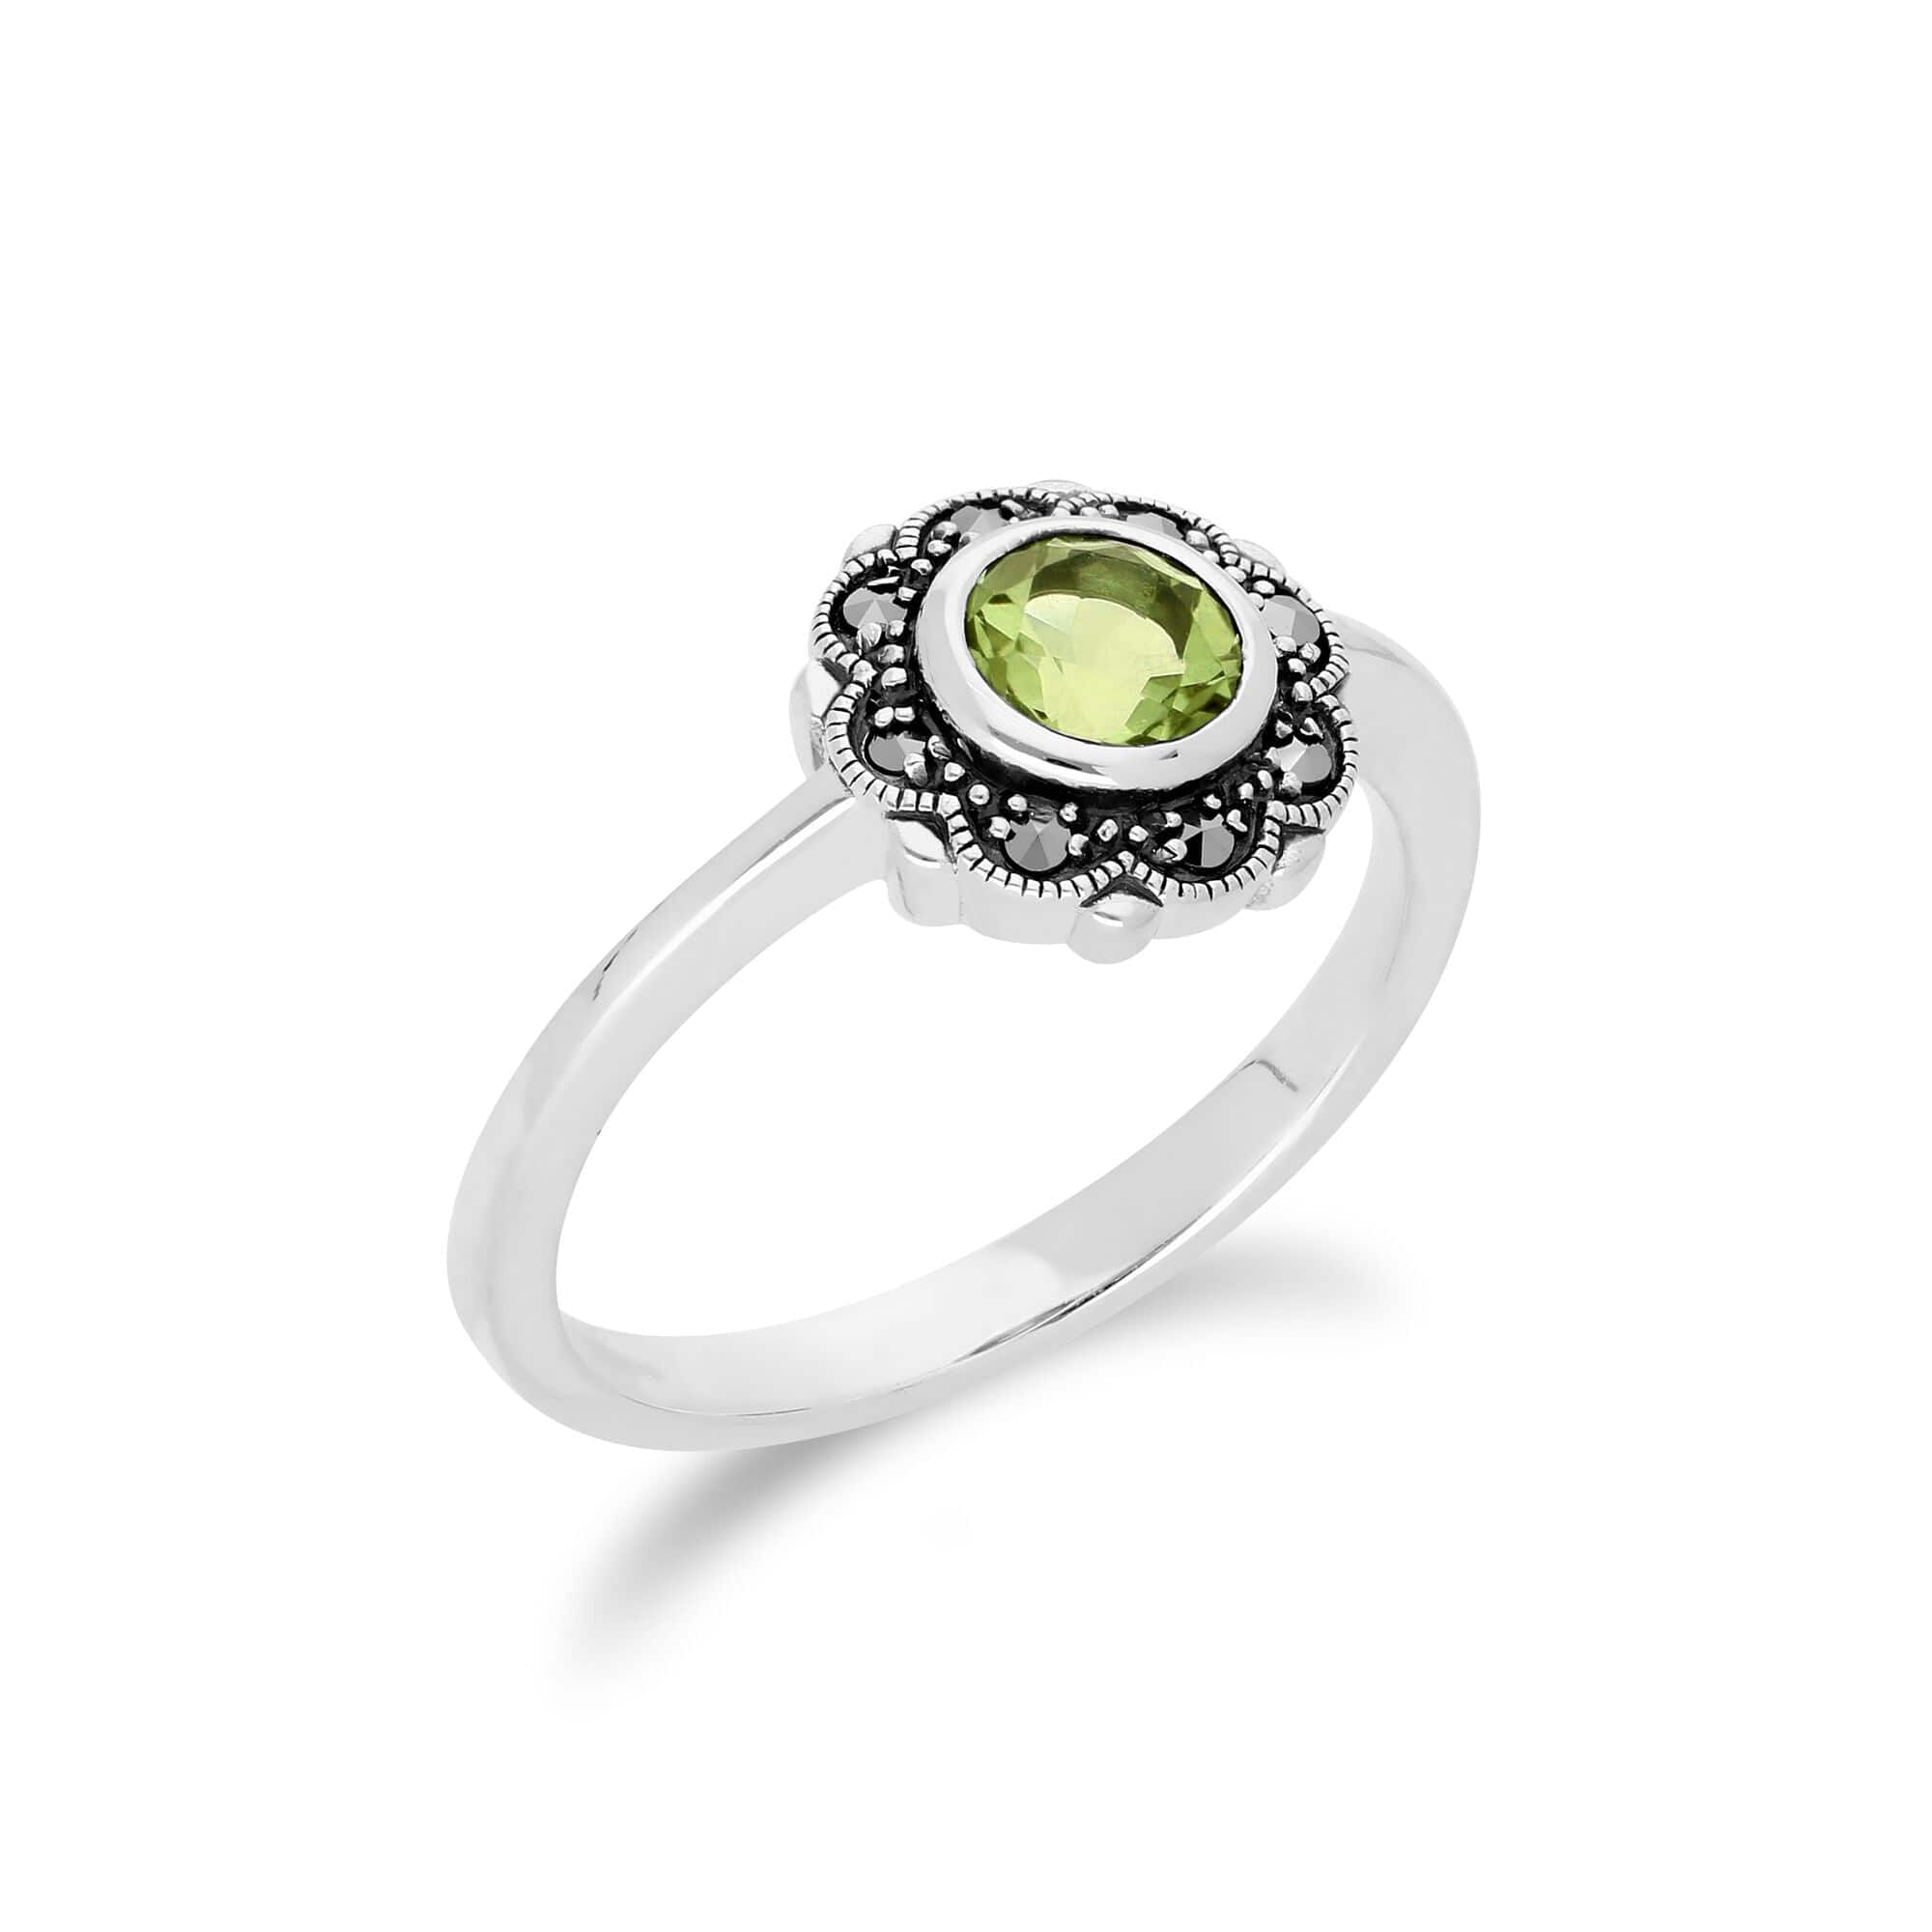 Floral Round Peridot & Marcasite Halo Ring in 925 Sterling Silver - Gemondo